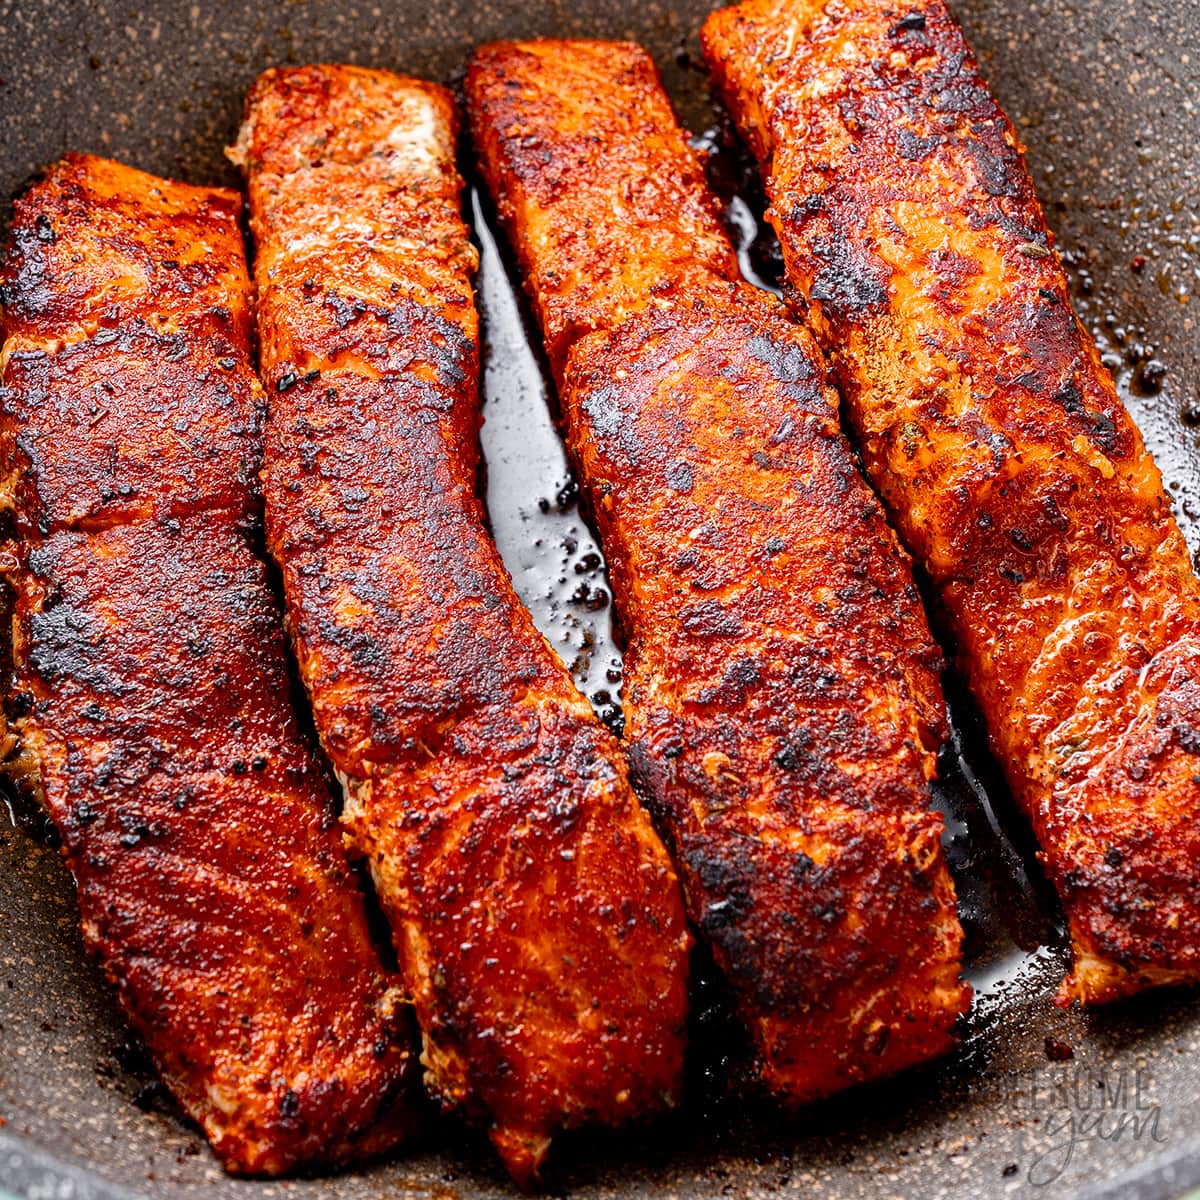 Blackened salmon in a skillet.